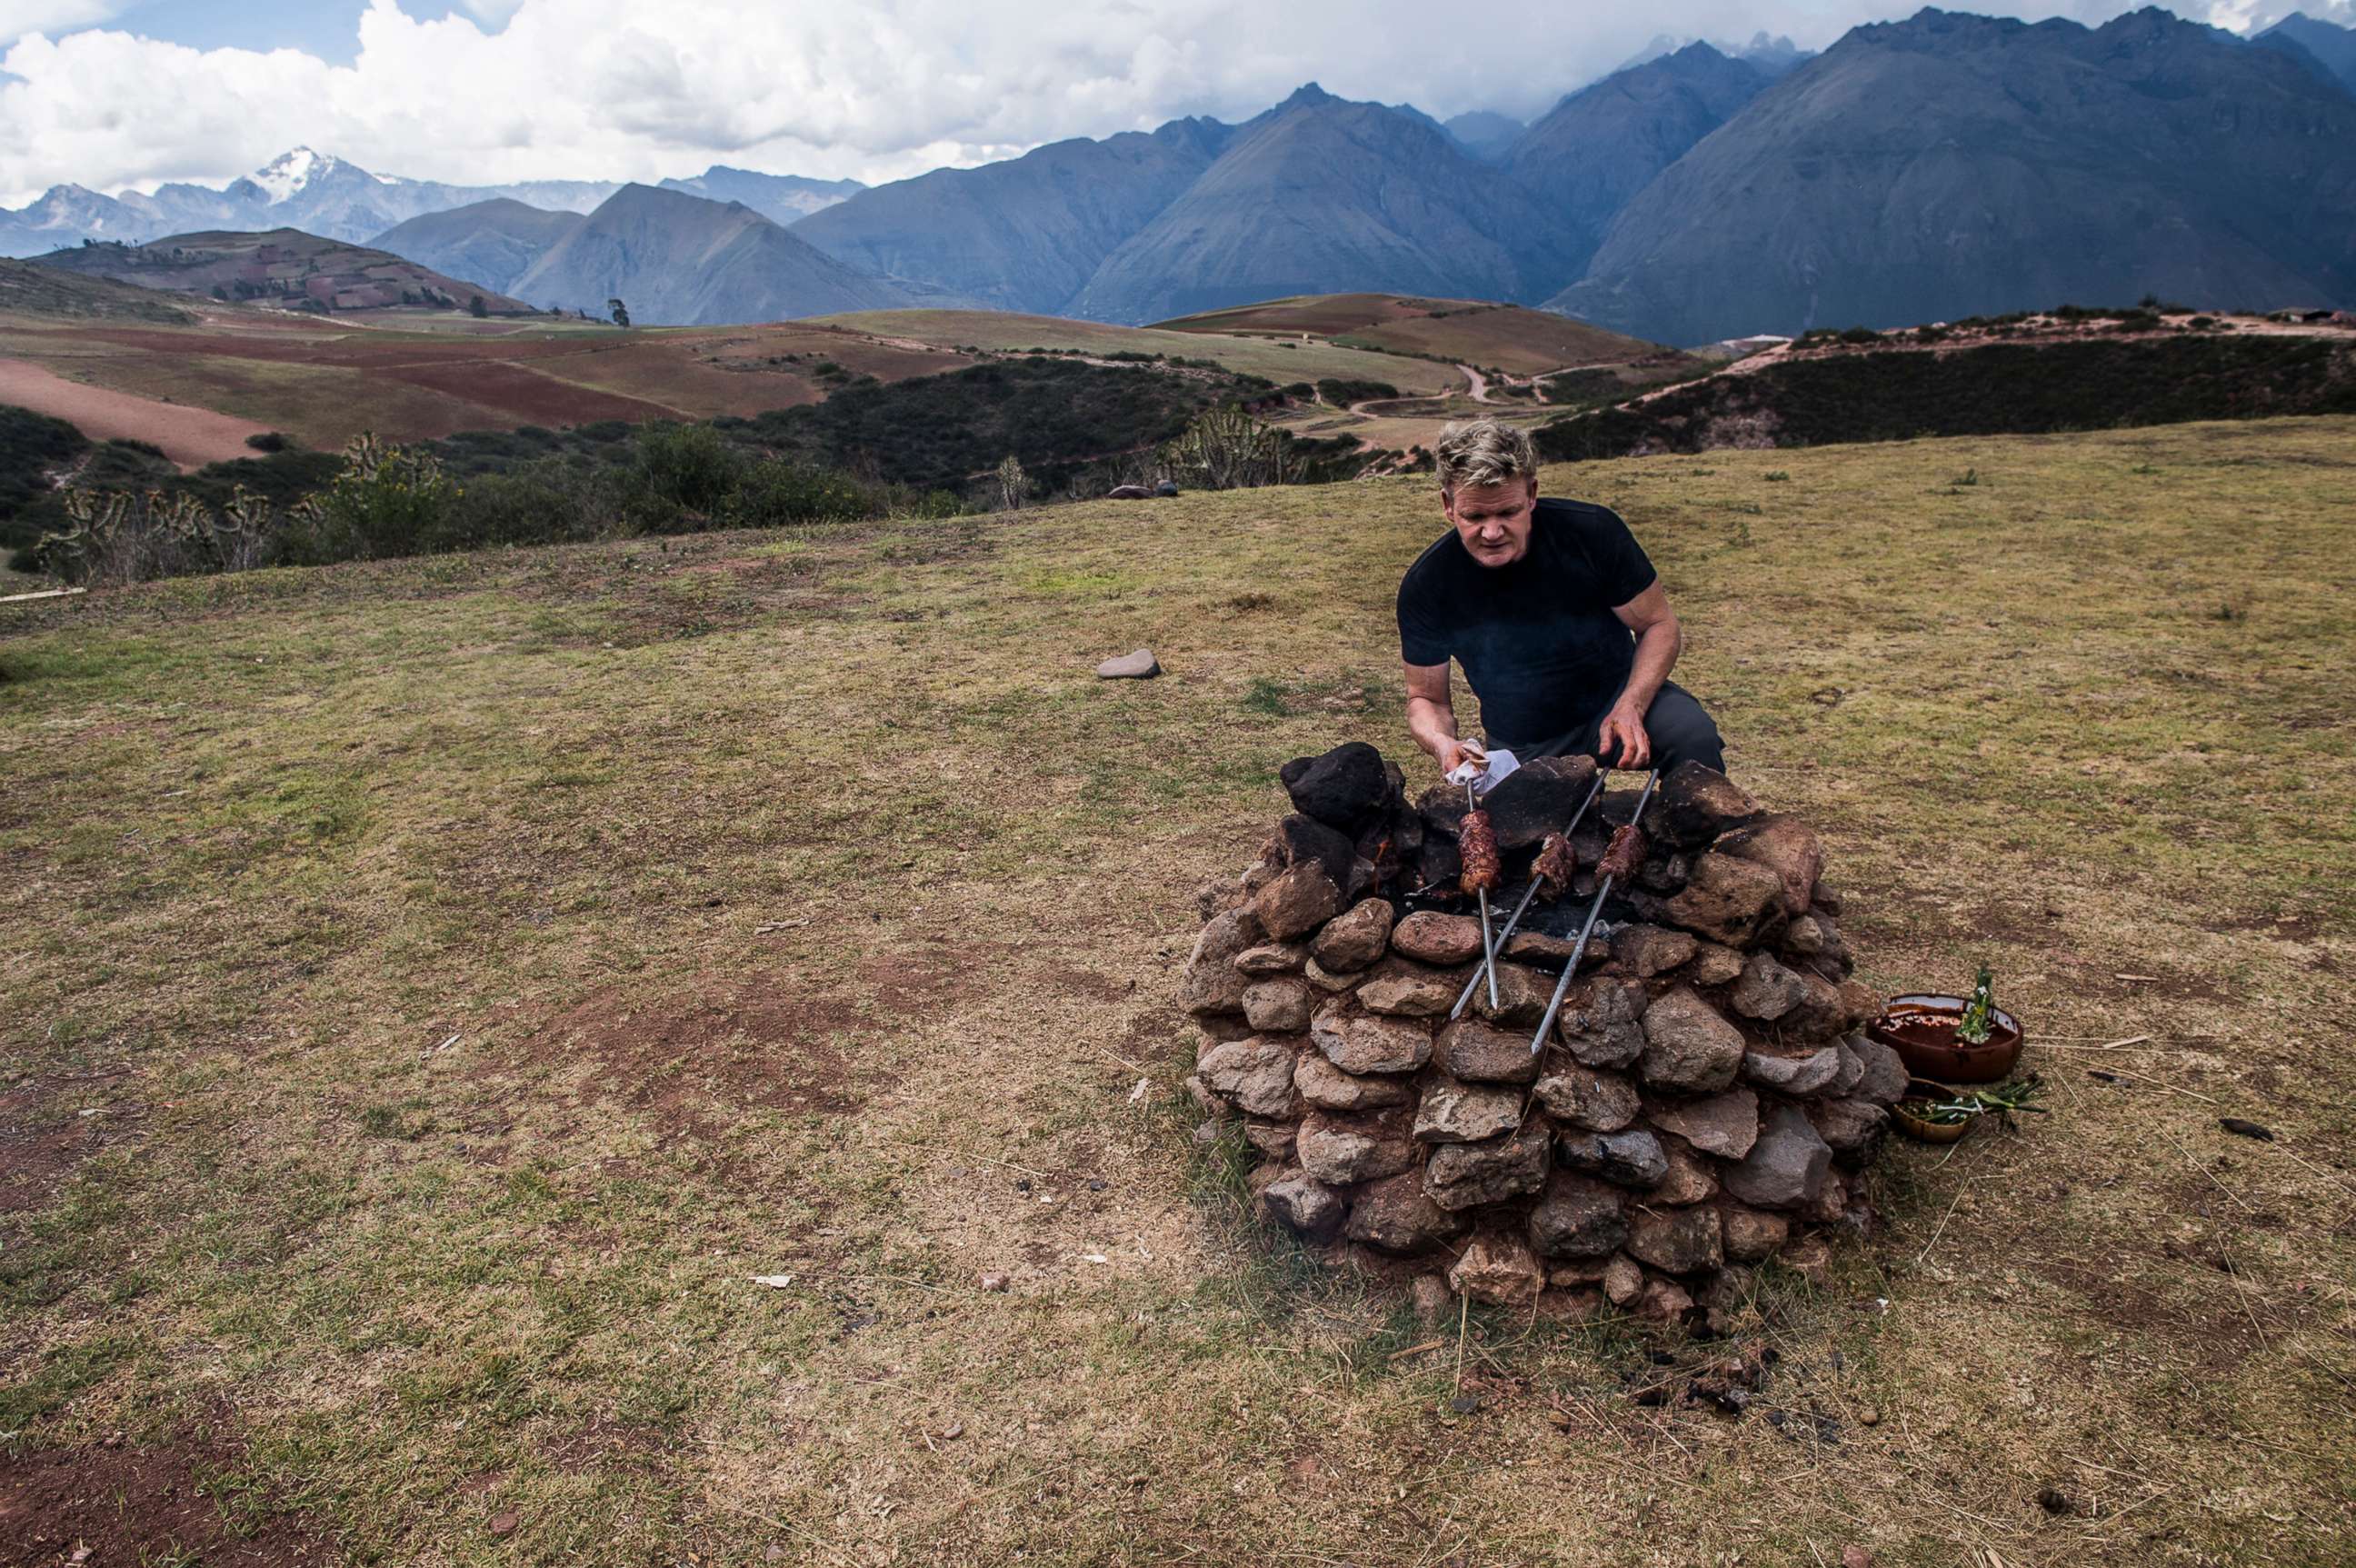 PHOTO: Gordon Ramsay cooks on an outdoor stove in Peru's Sacred Valley.